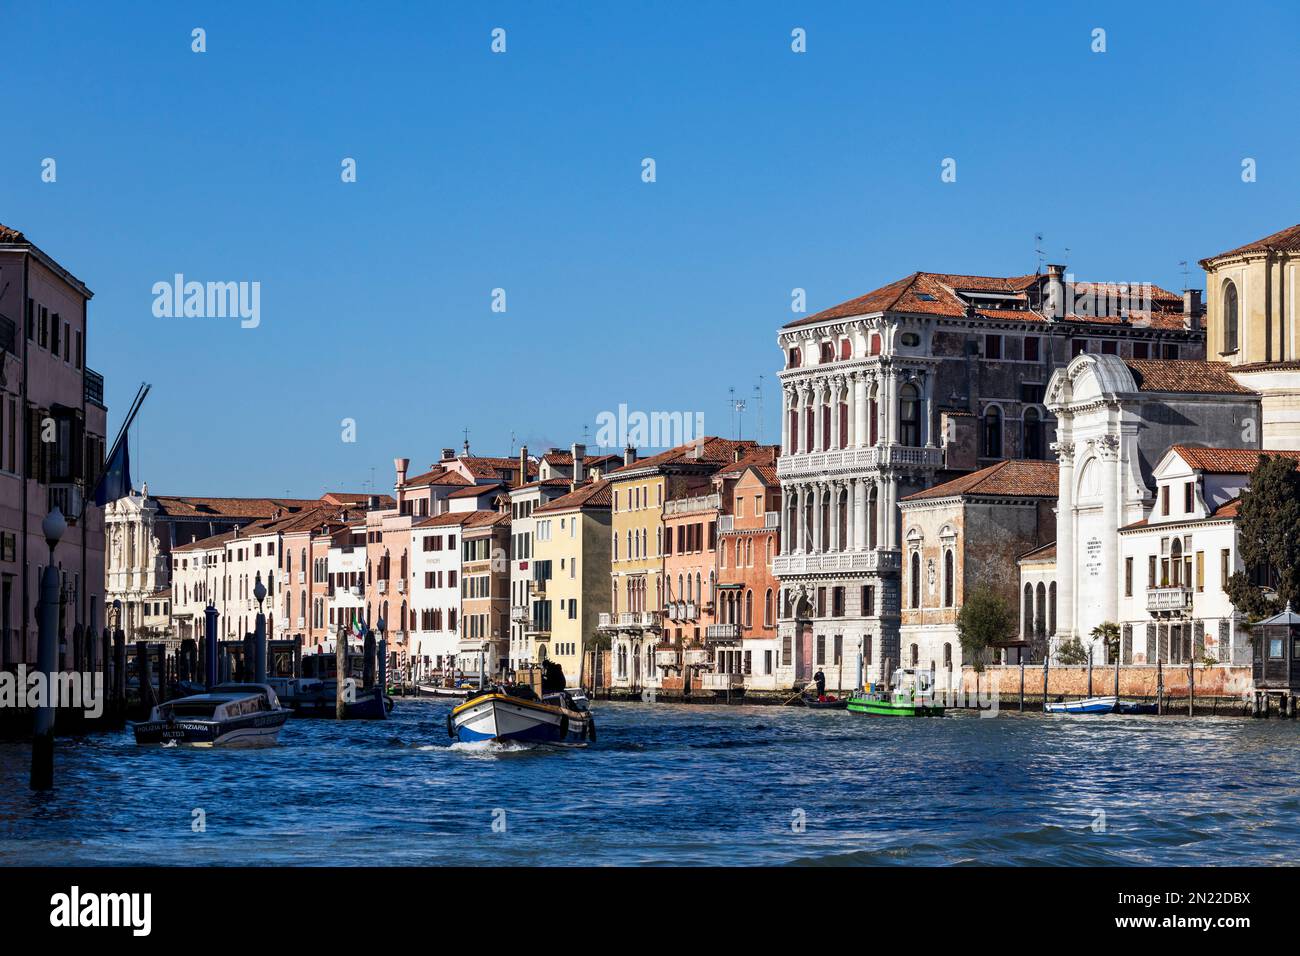 Commercial boat on Canal Grande, Grand Canal, Venice, Veneto, Italy, Europe Stock Photo